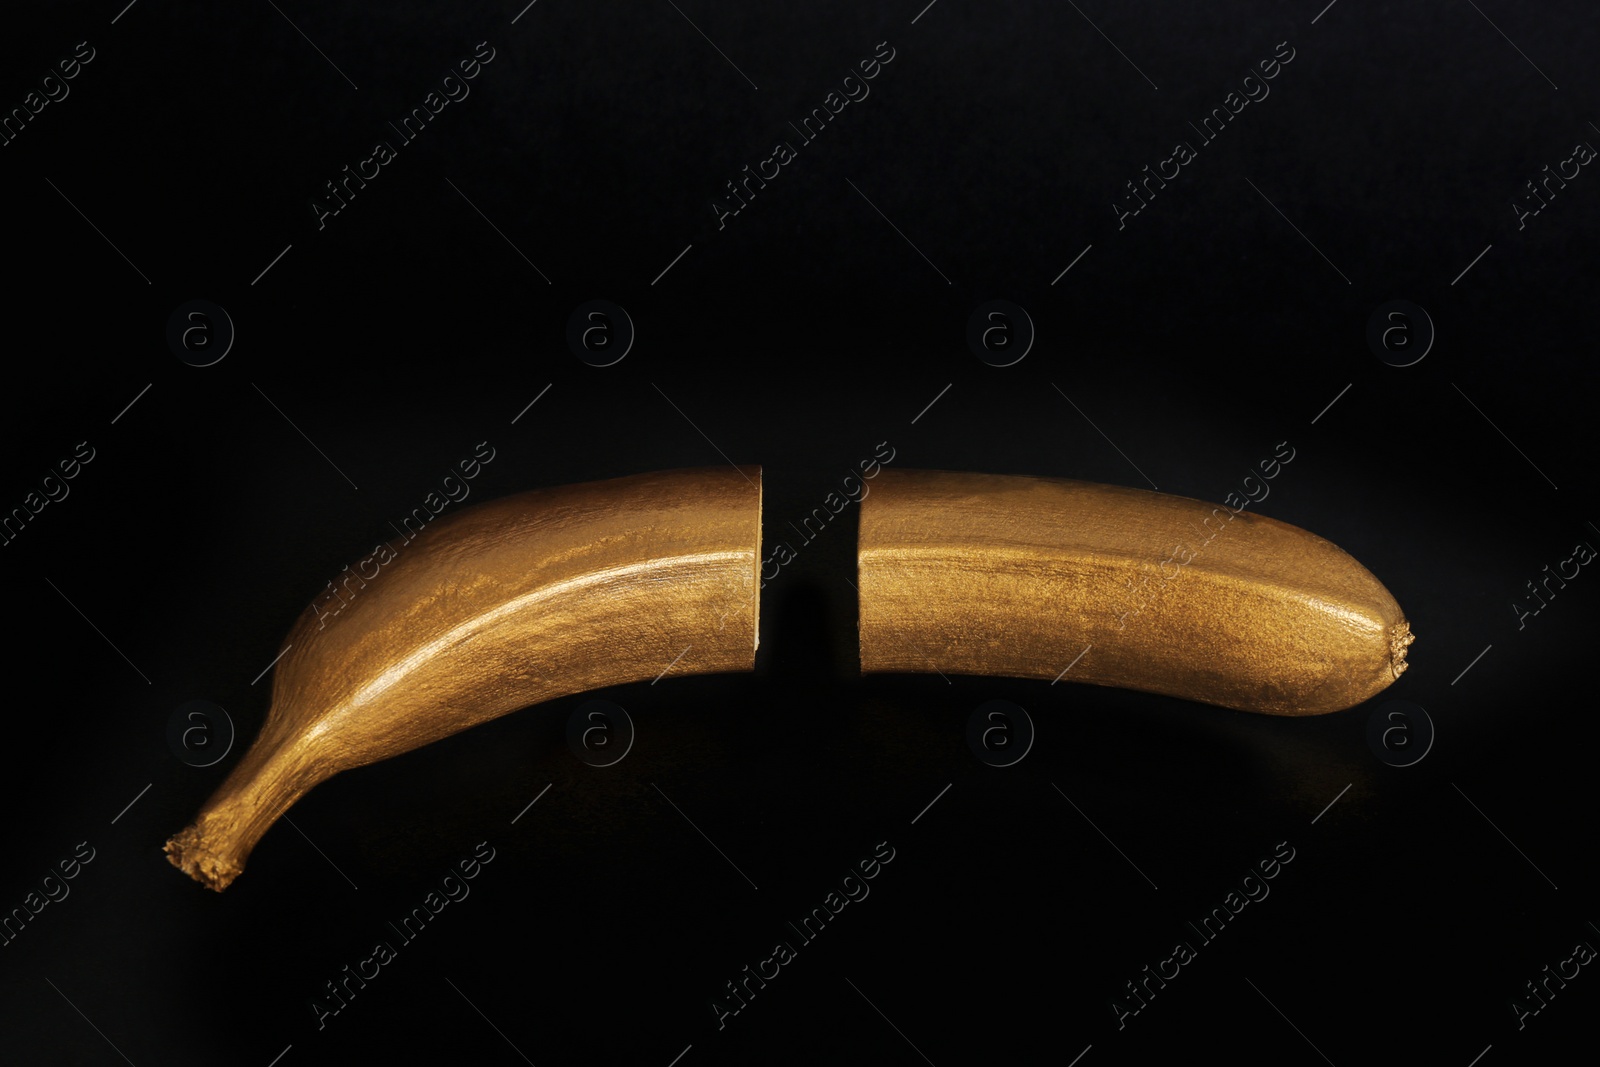 Photo of Gold painted cut banana on black background